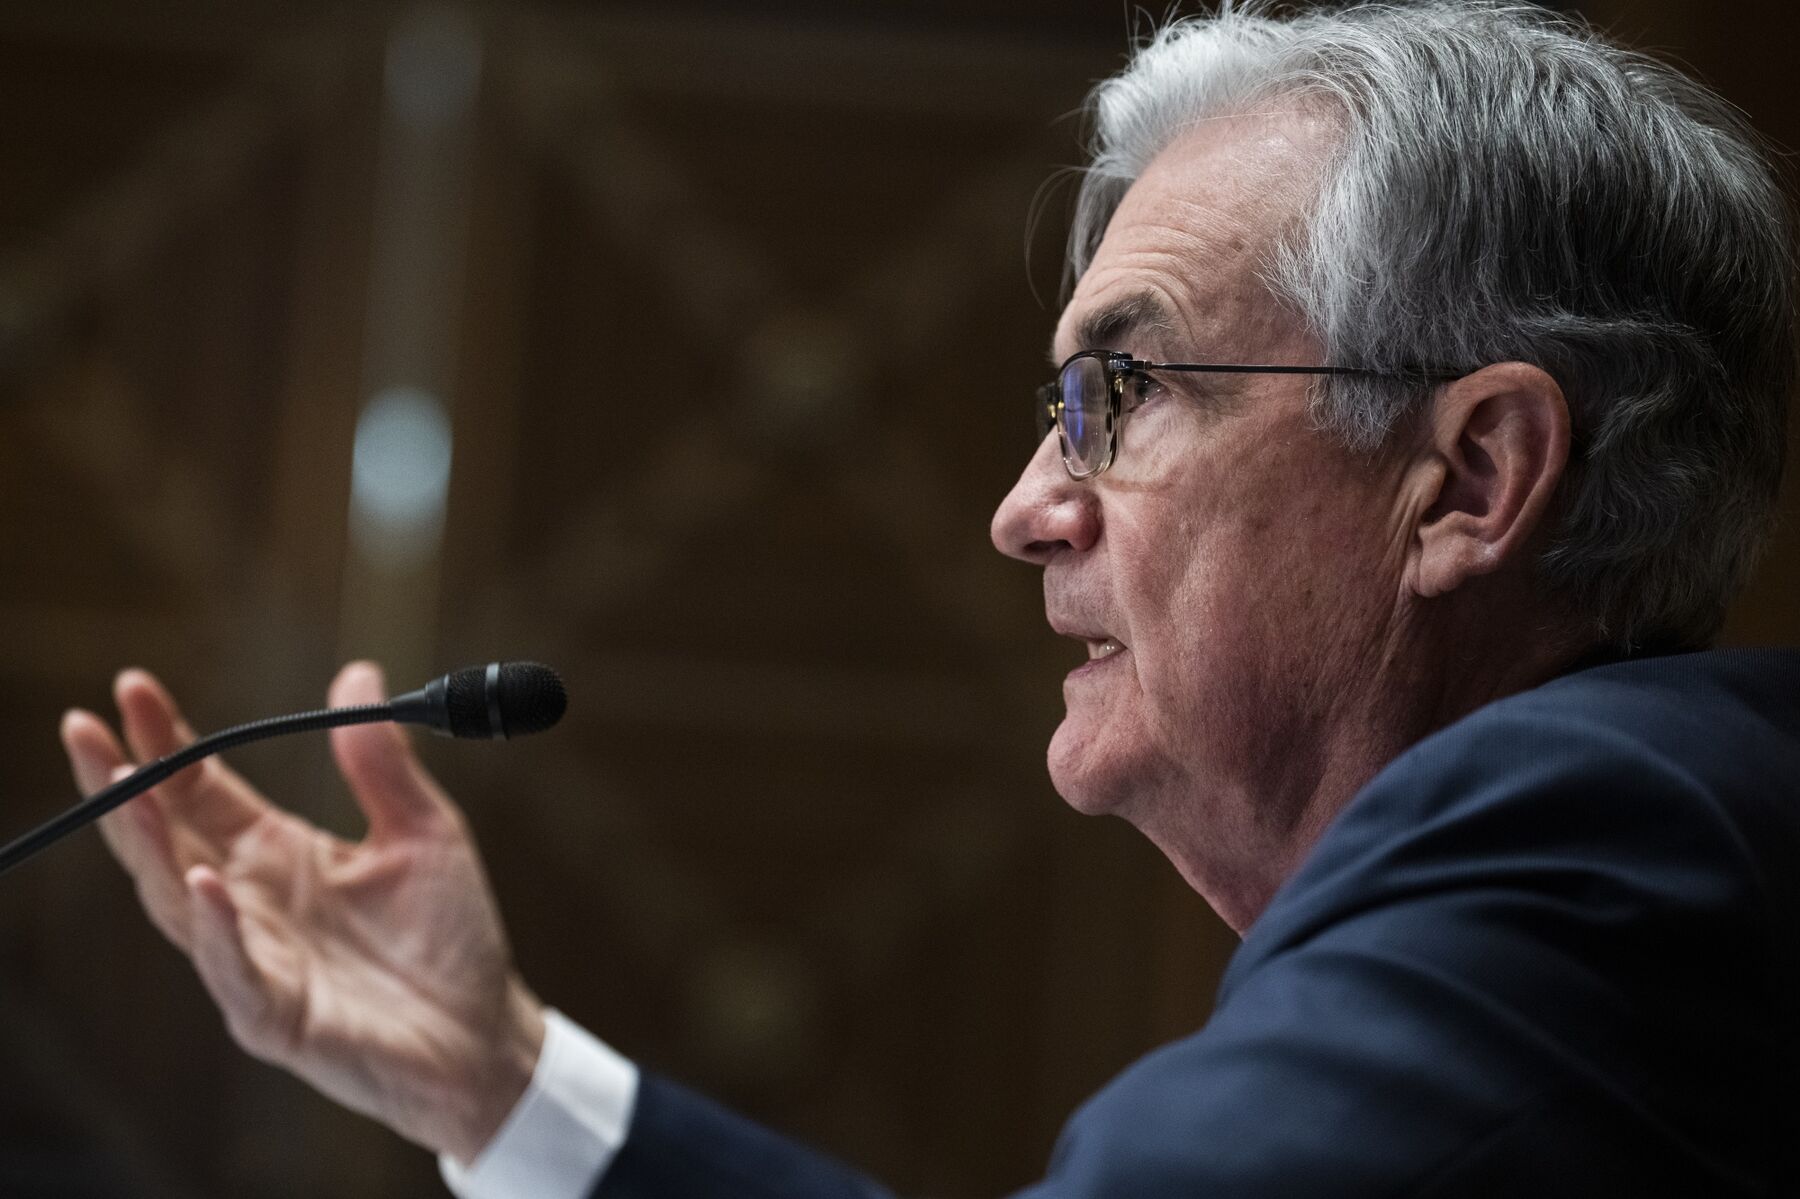 Jerome Powell, chairman of the U.S. Federal Reserve, speaks during a Senate Banking, Housing, and Urban Affairs Committee hearing in Washington, D.C., U.S., on Thursday, March 3, 2022. 